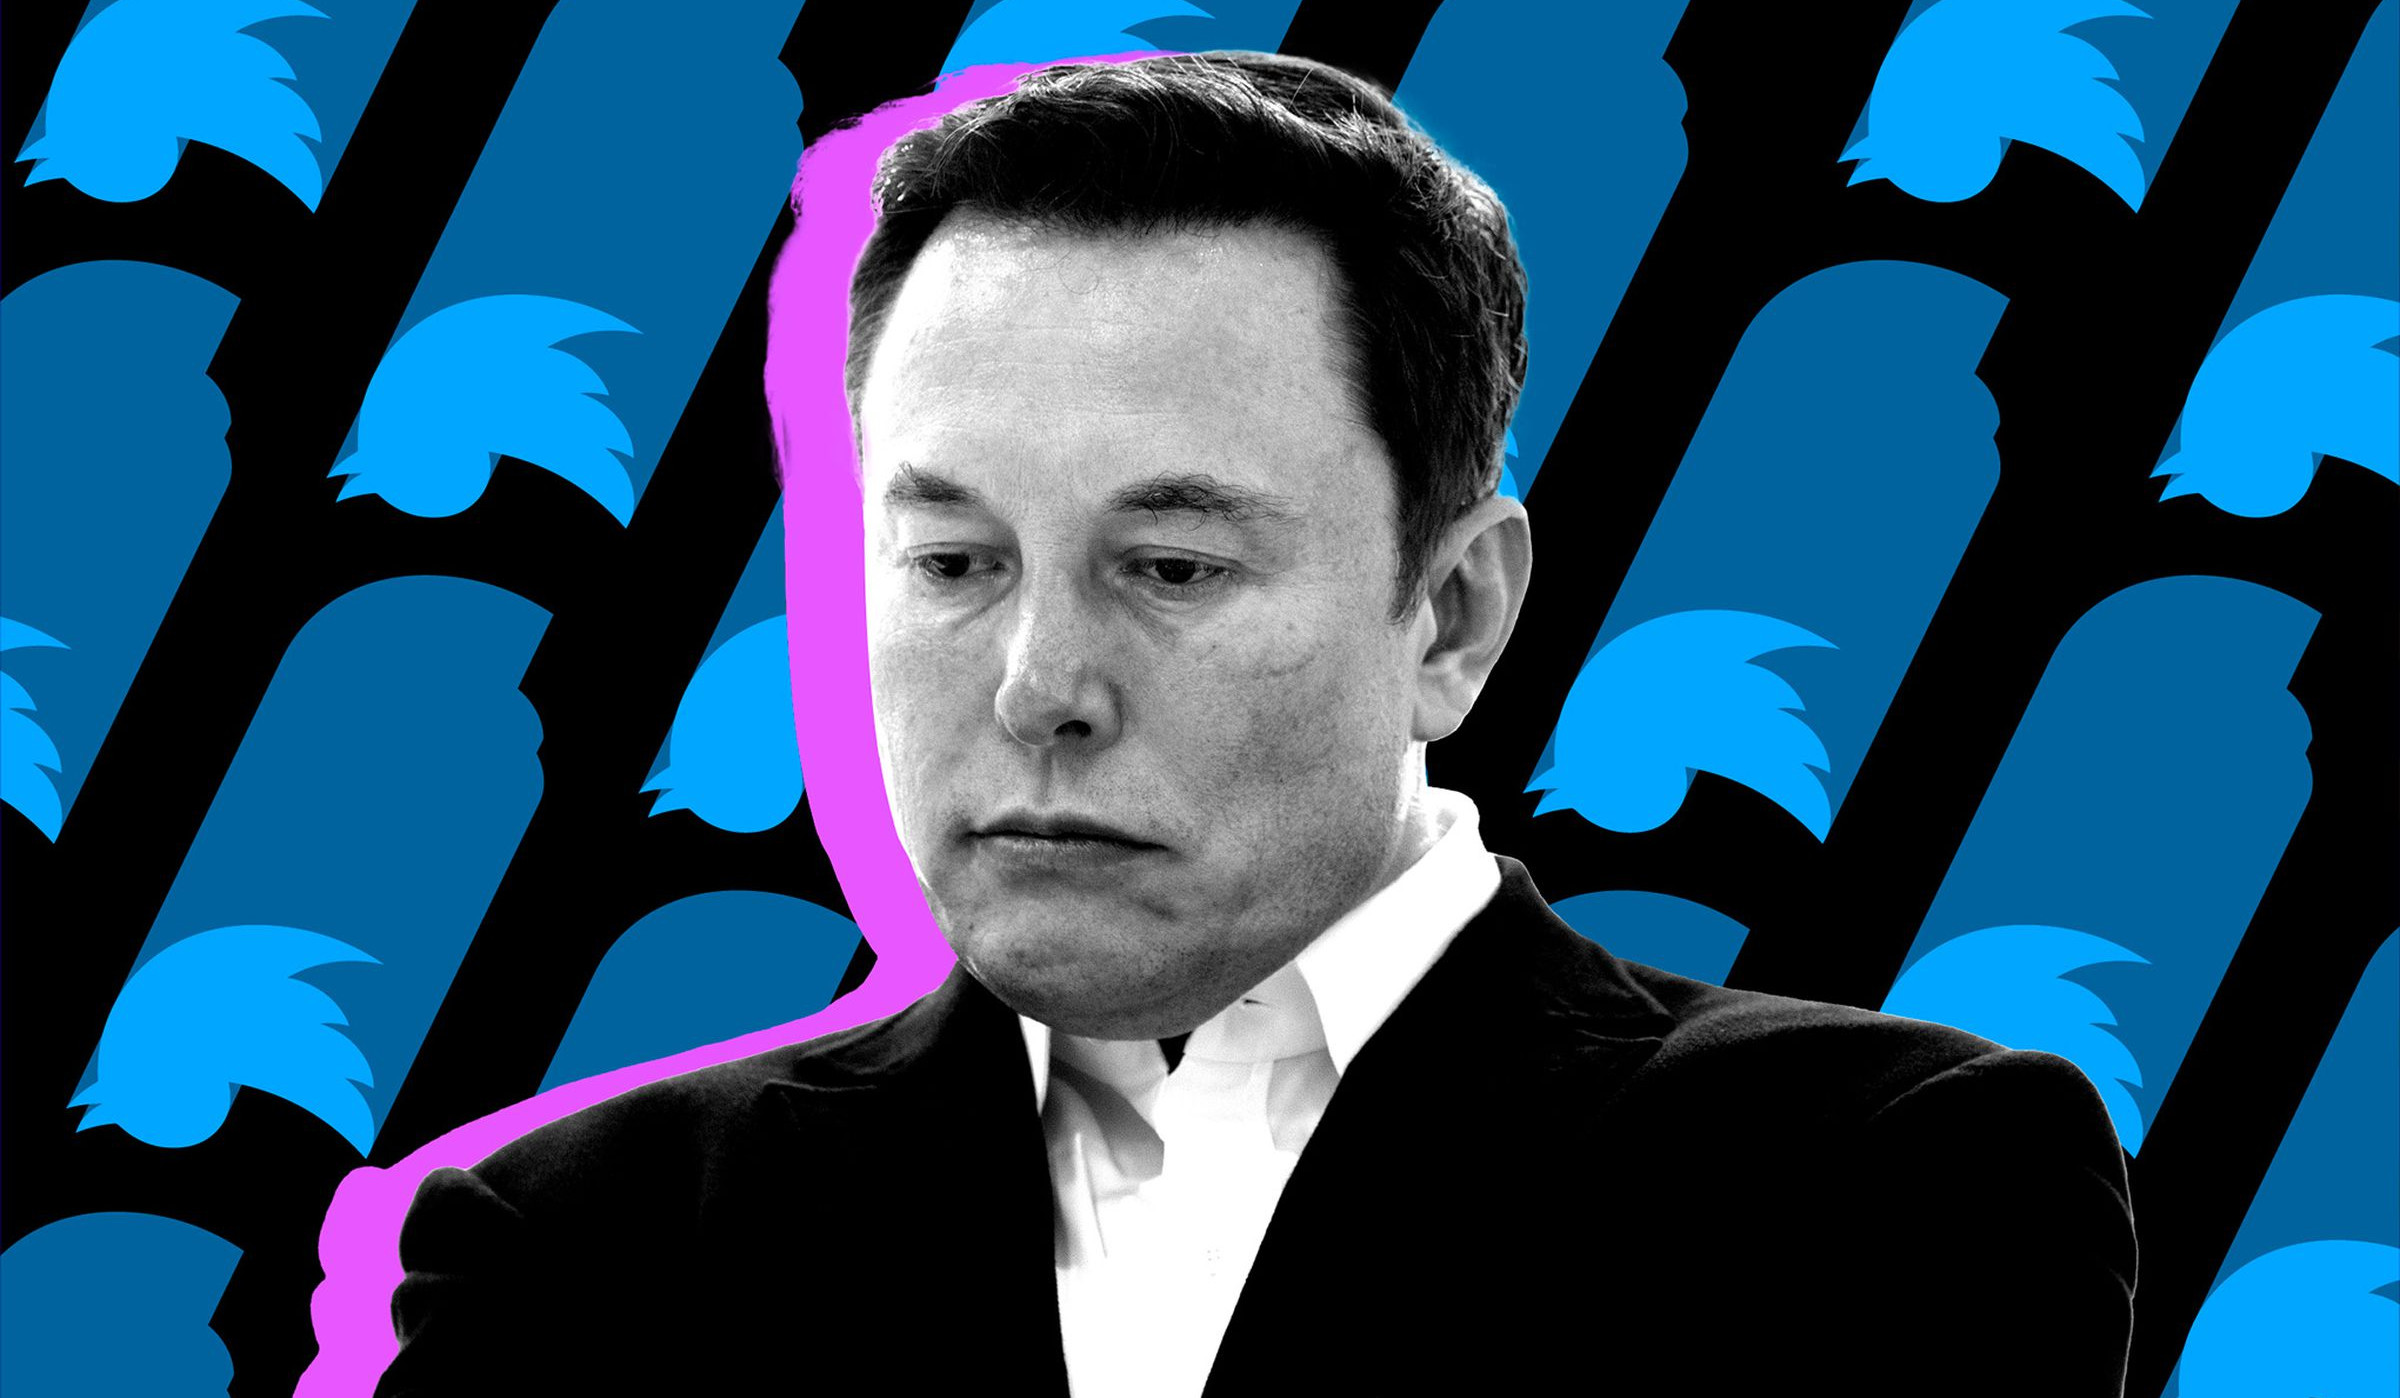 Musk says Twitter to provide 'amnesty' to some suspended accounts starting next week